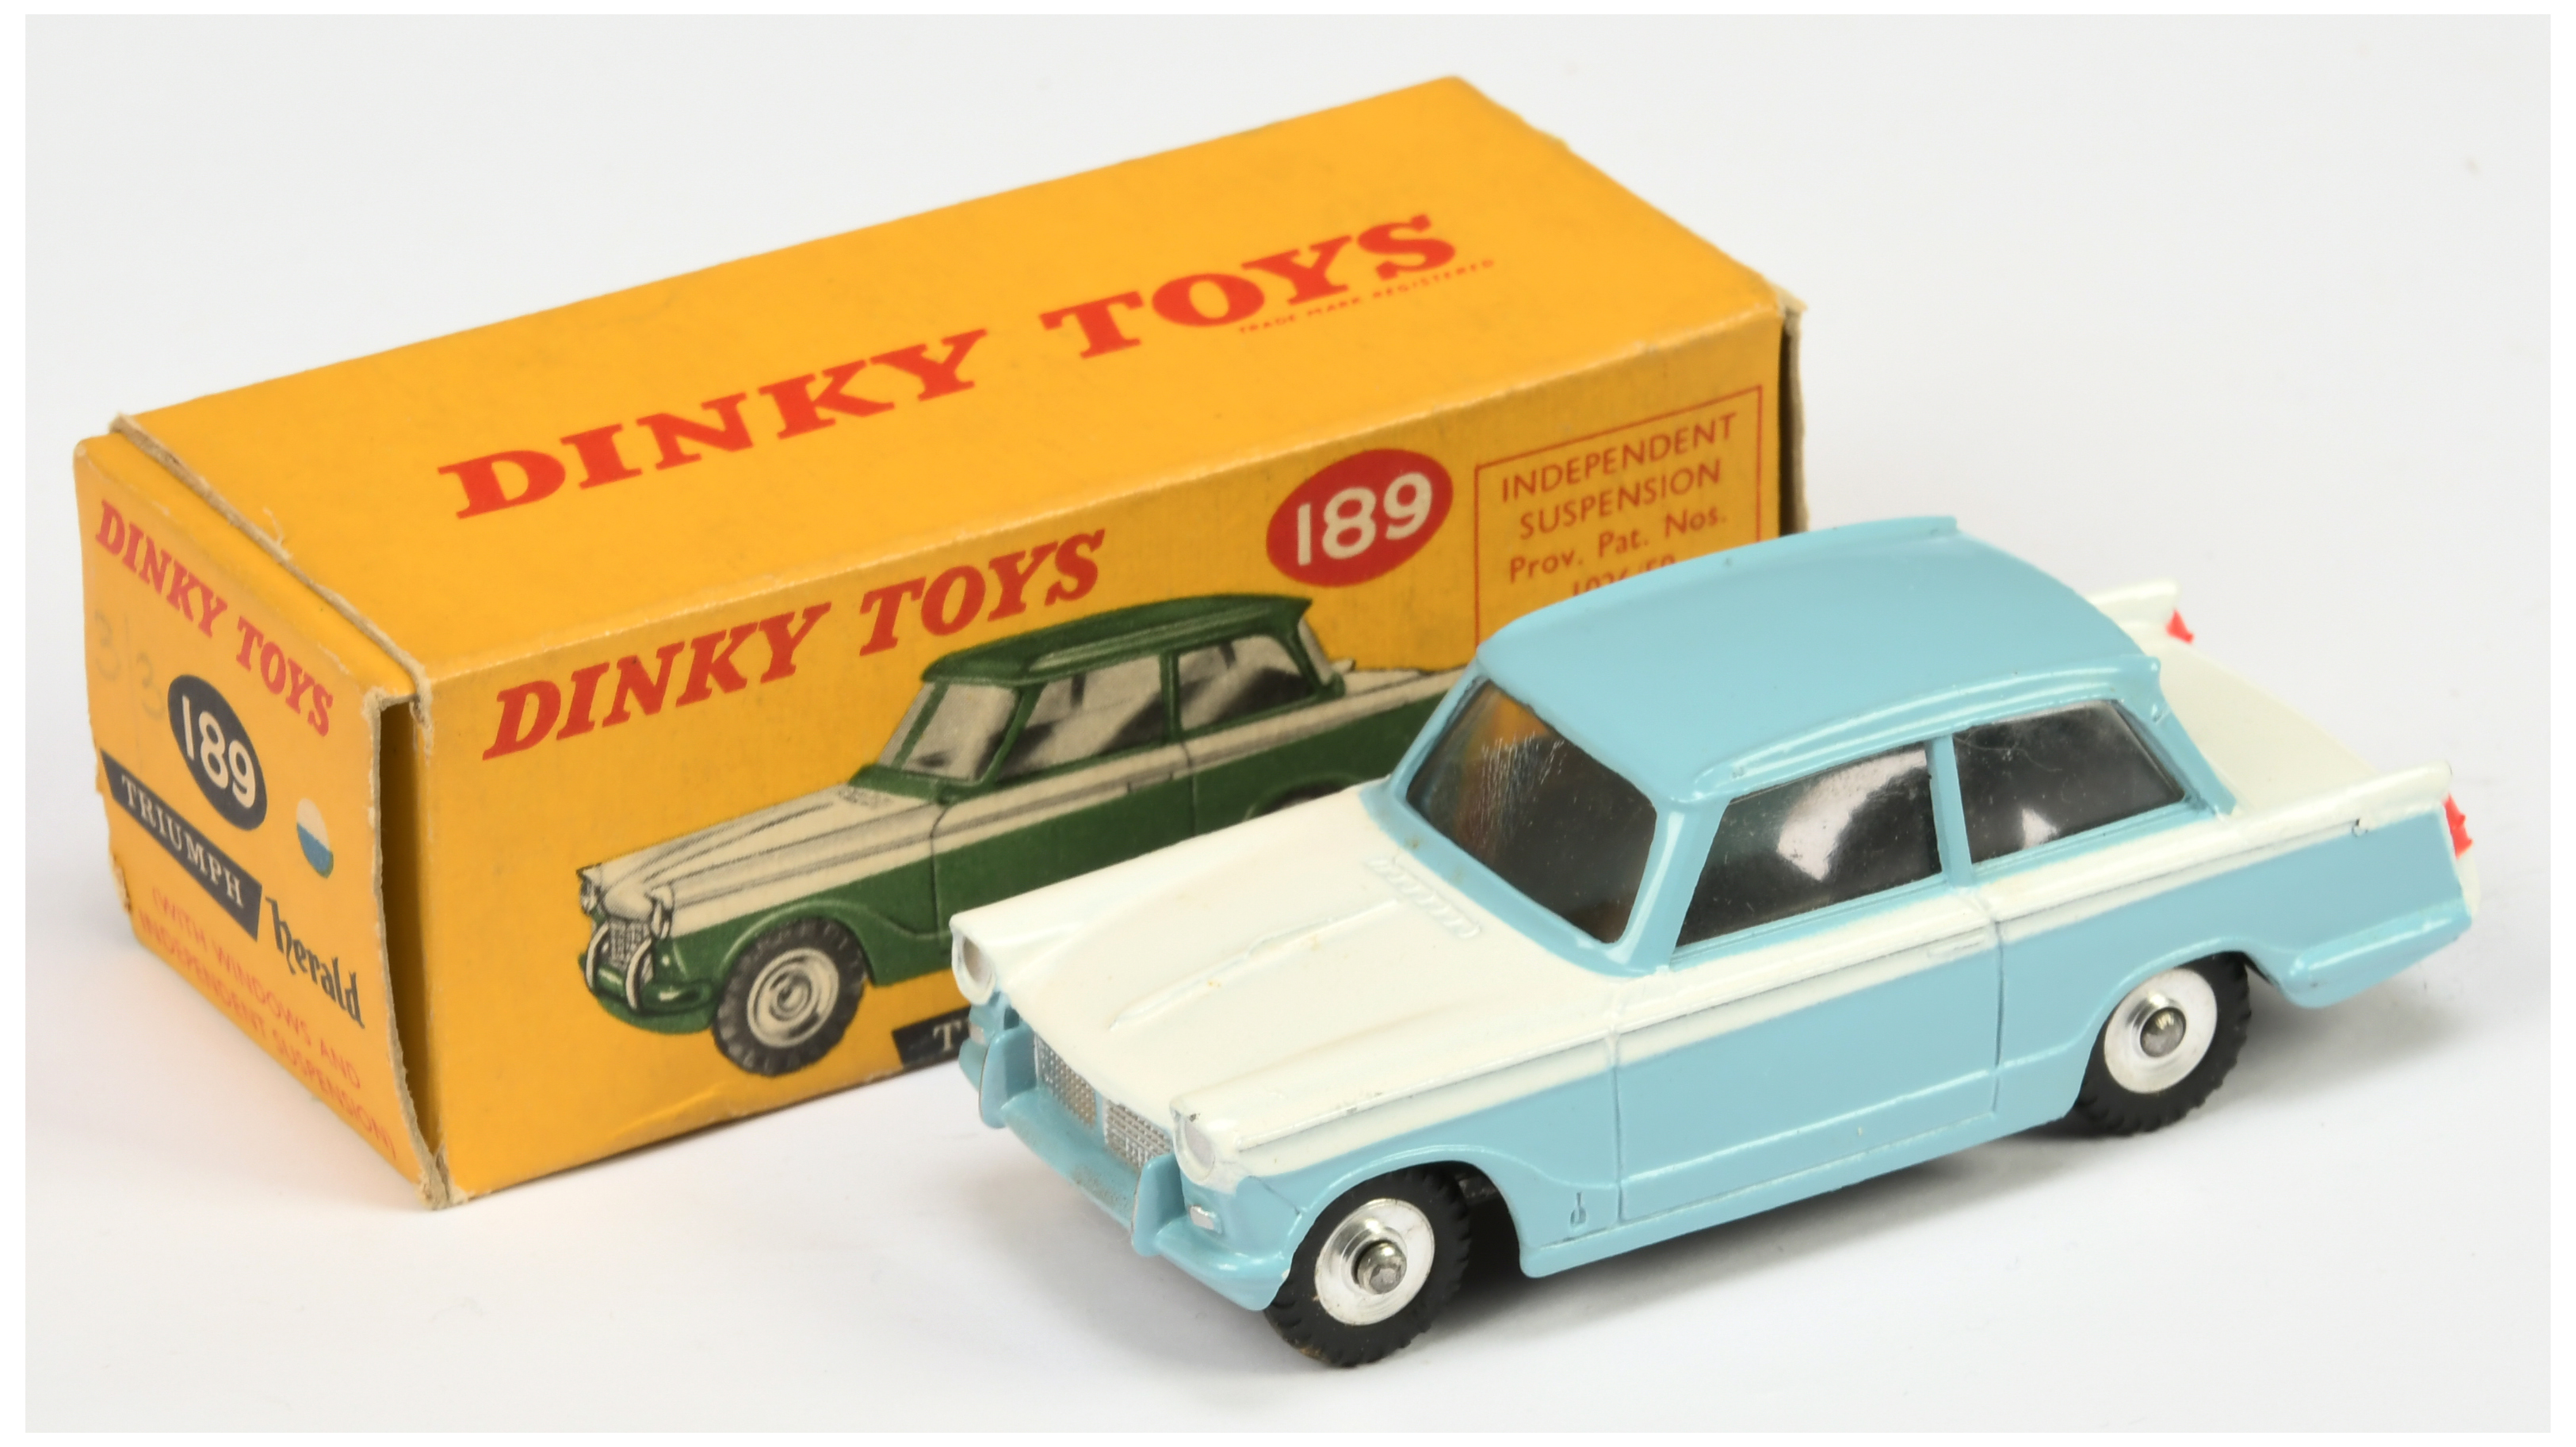 Dinky Toys 189 Triumph Herald Saloon - Two-Tone white and light blue, silver trim and spun hubs